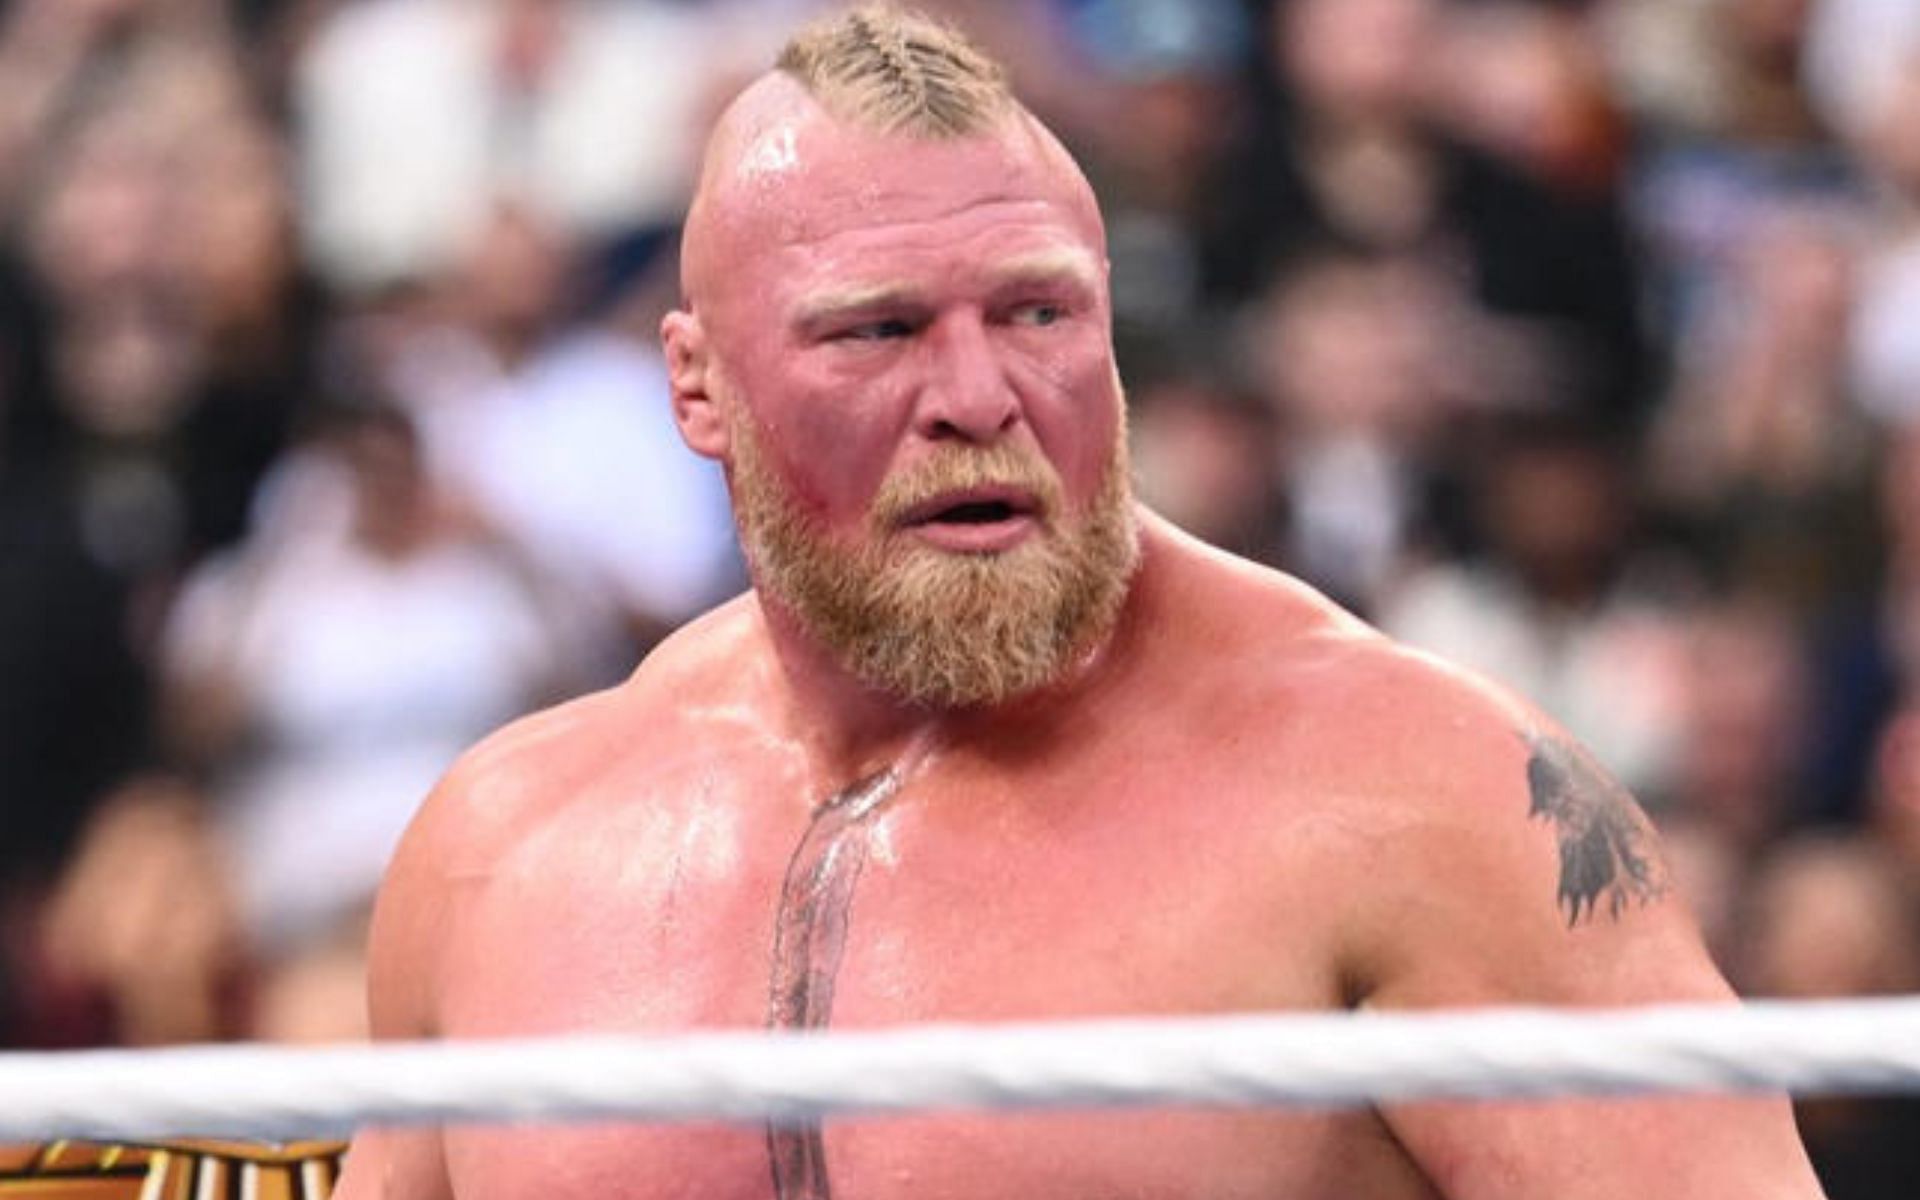 The Beast Incarnate picked up his first WrestleMania win in five years